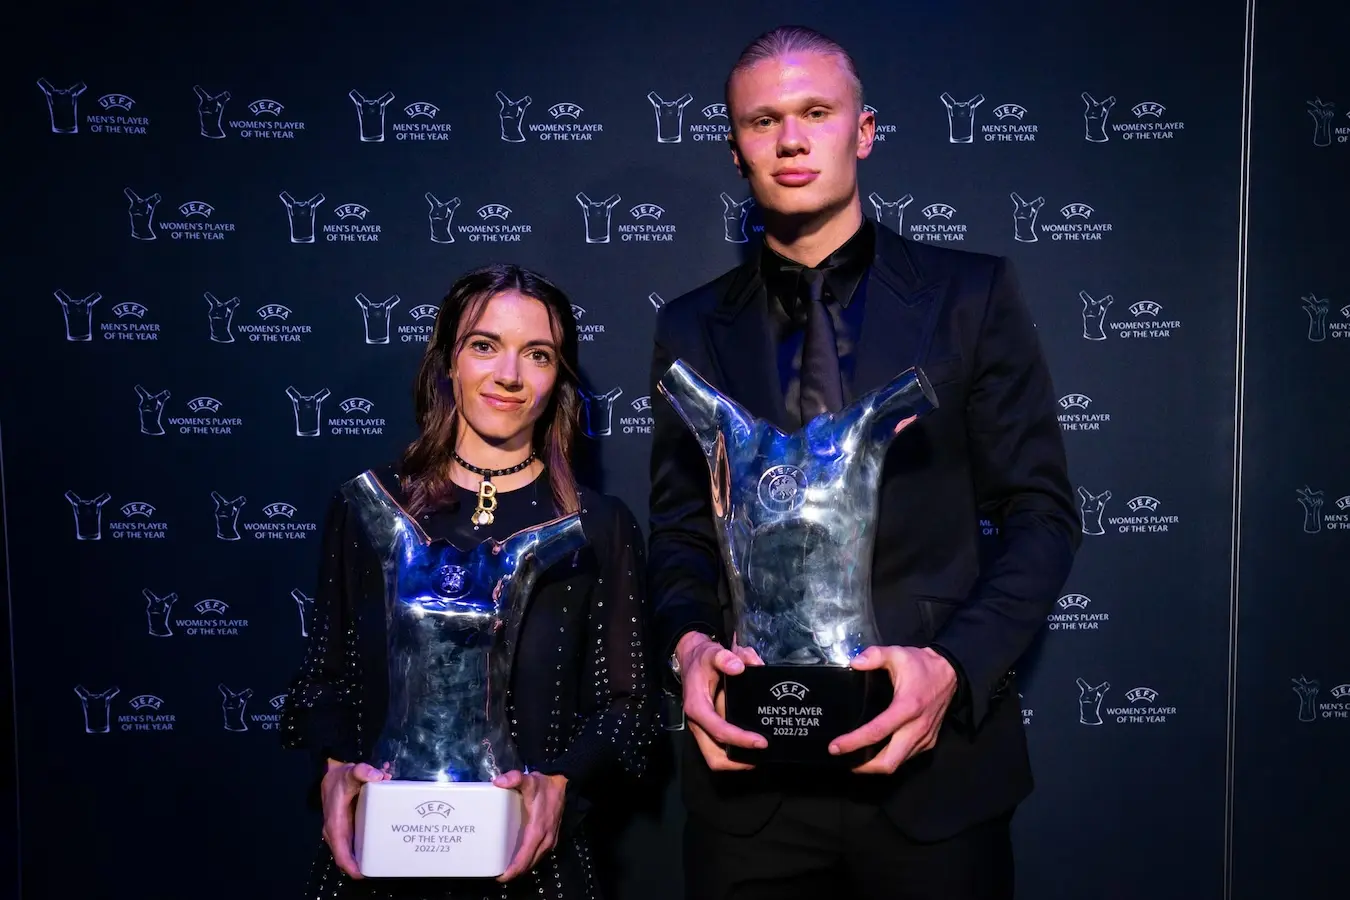 Aitana Bonmatí and Erling Haaland with their 2022/23 UEFA player of the year trophy